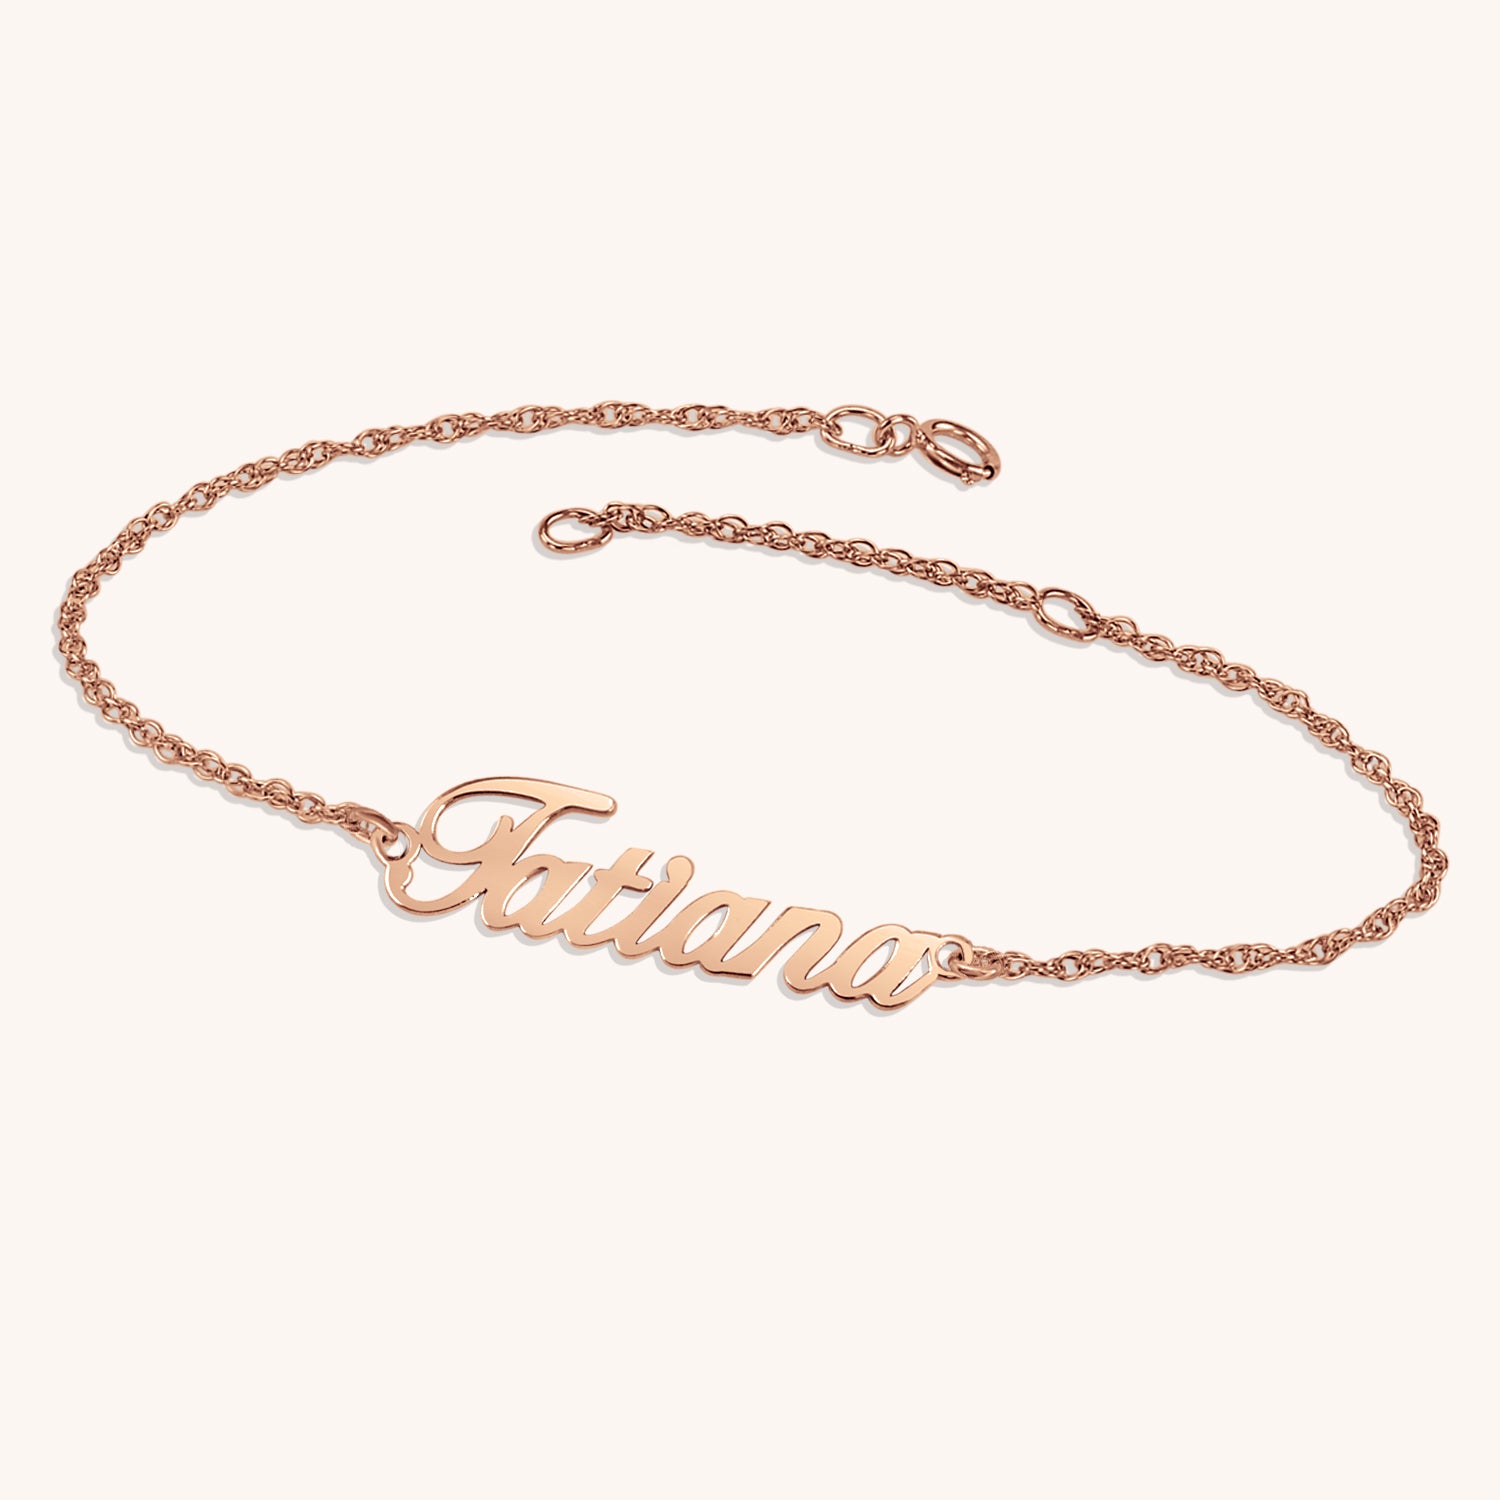 Amazoncom Name Plate Bar Bracelet Personalized Gold Initial Pedant Bar  Bracelet Rose Gold Nameplate ID Medical Bracelet Silver Roman Numerals  Jewelry  Handmade Products